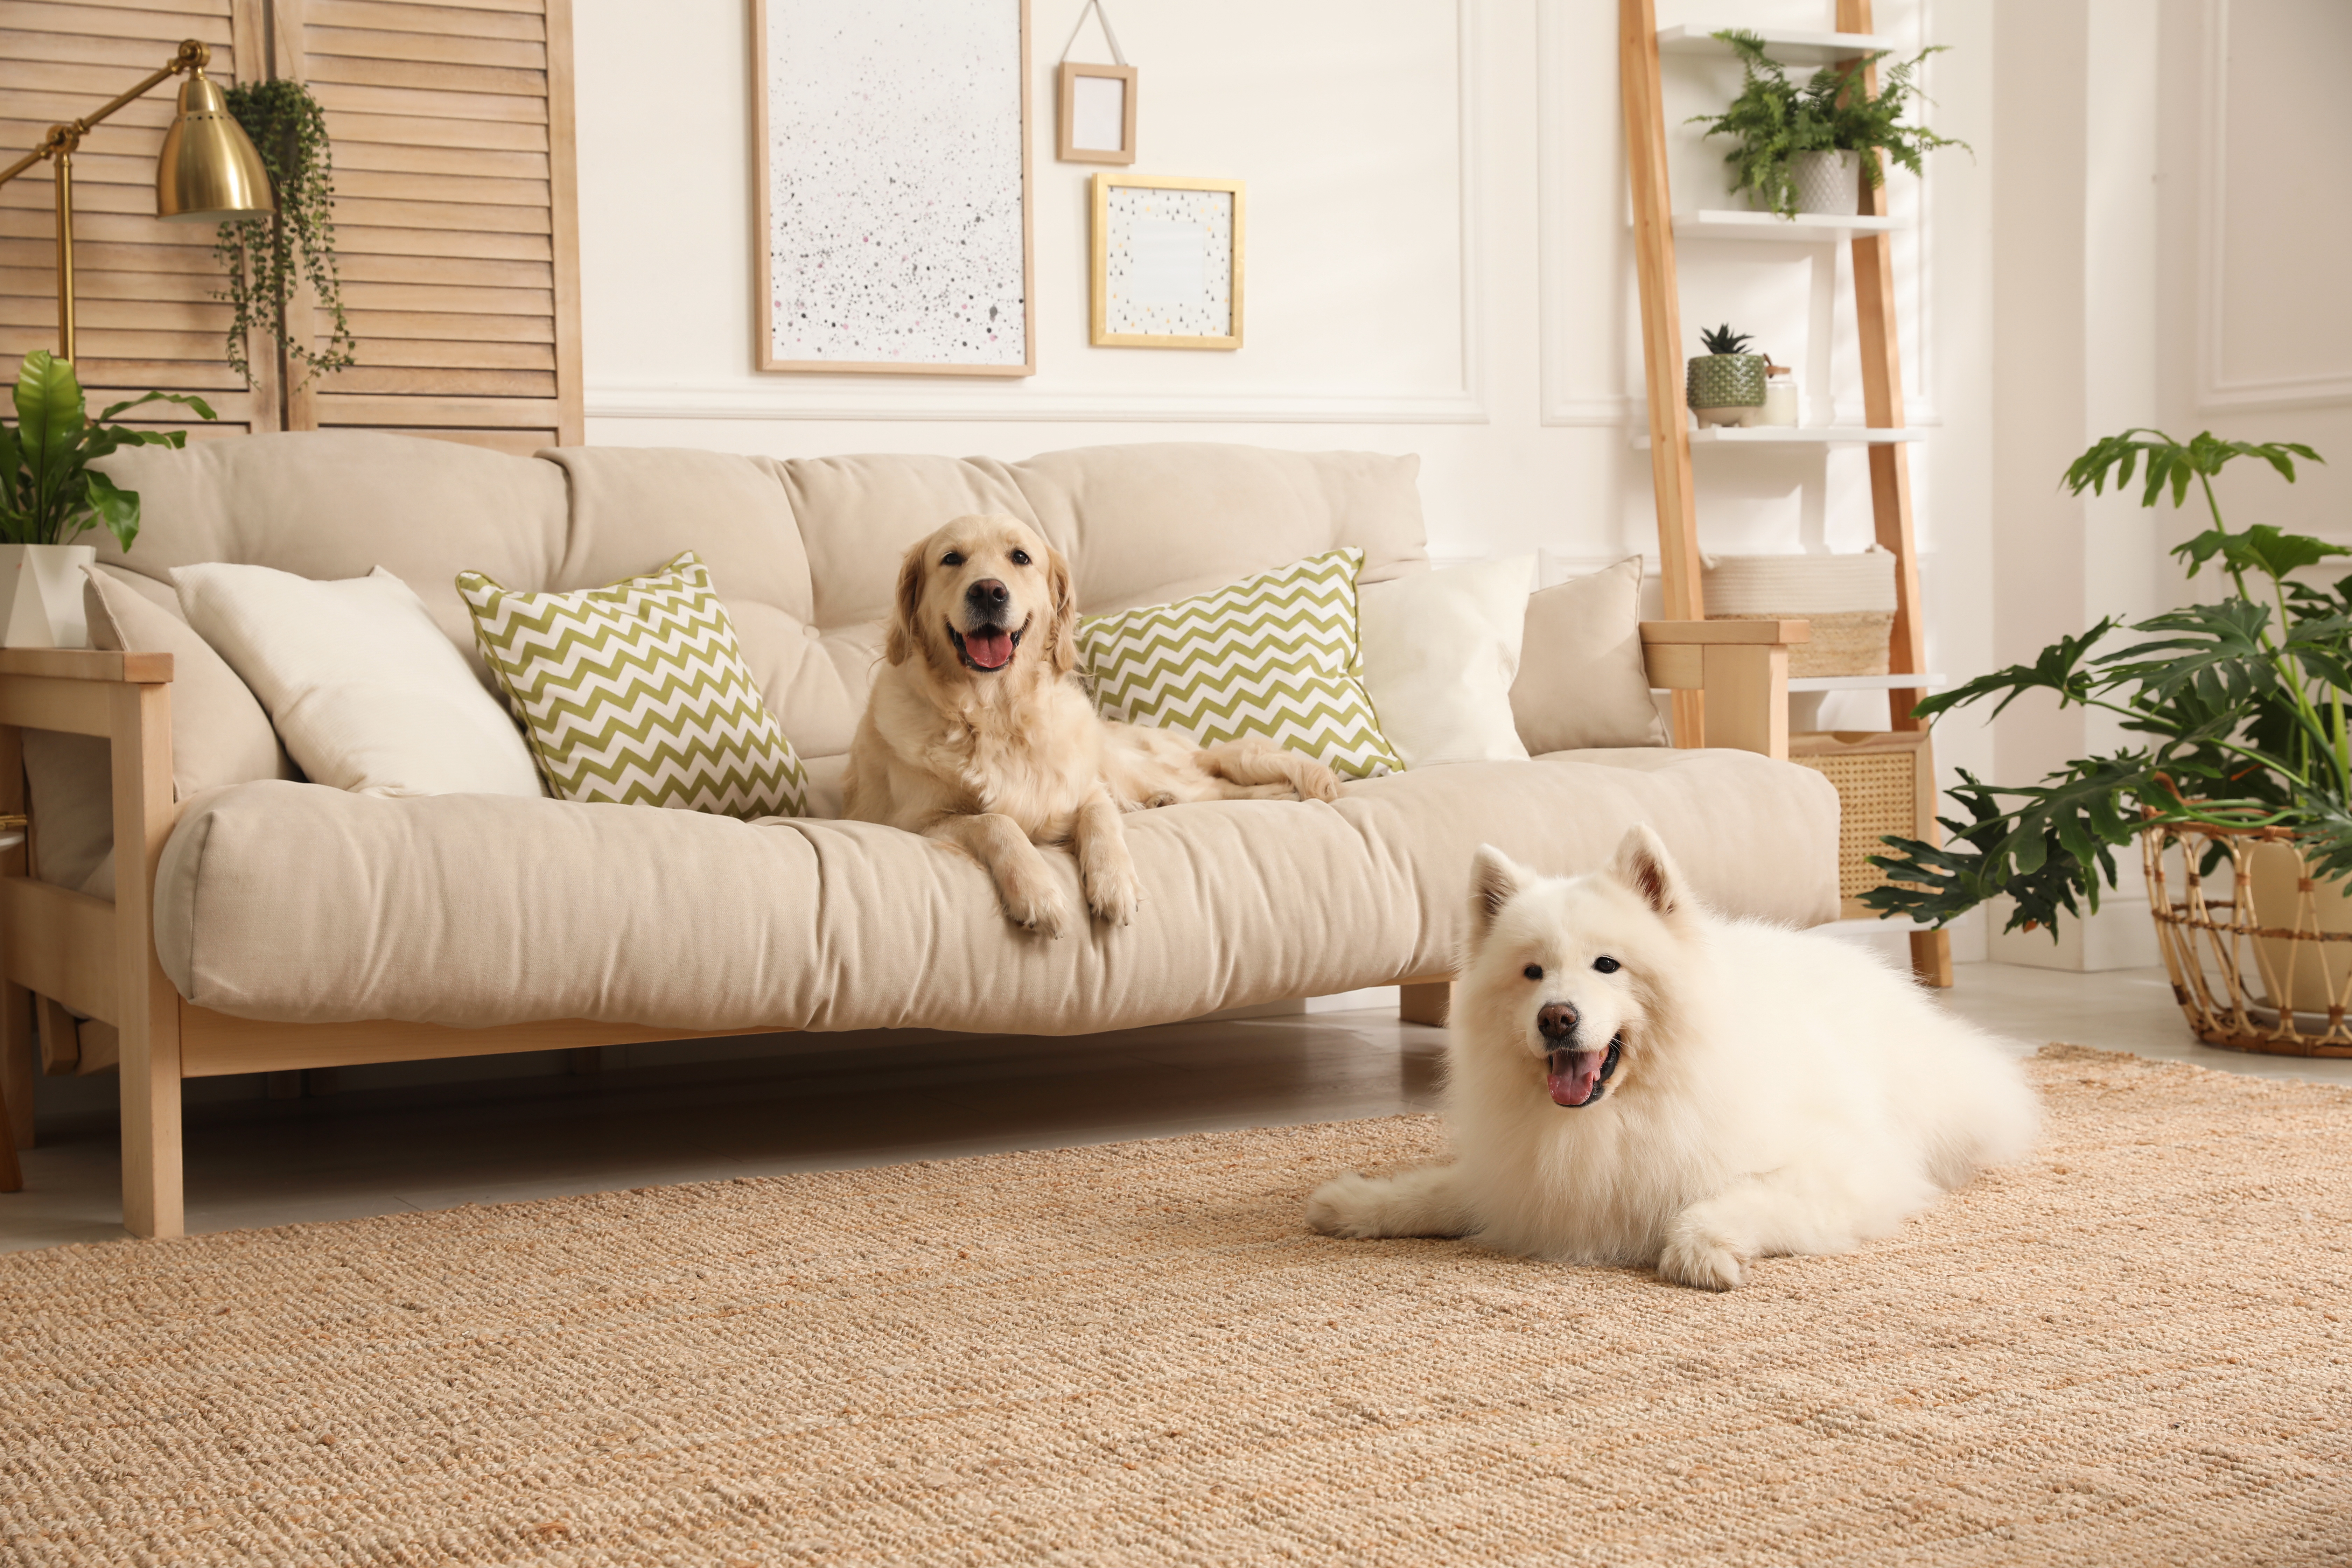 Adorable dogs resting in a modern living room | Source: Shutterstock